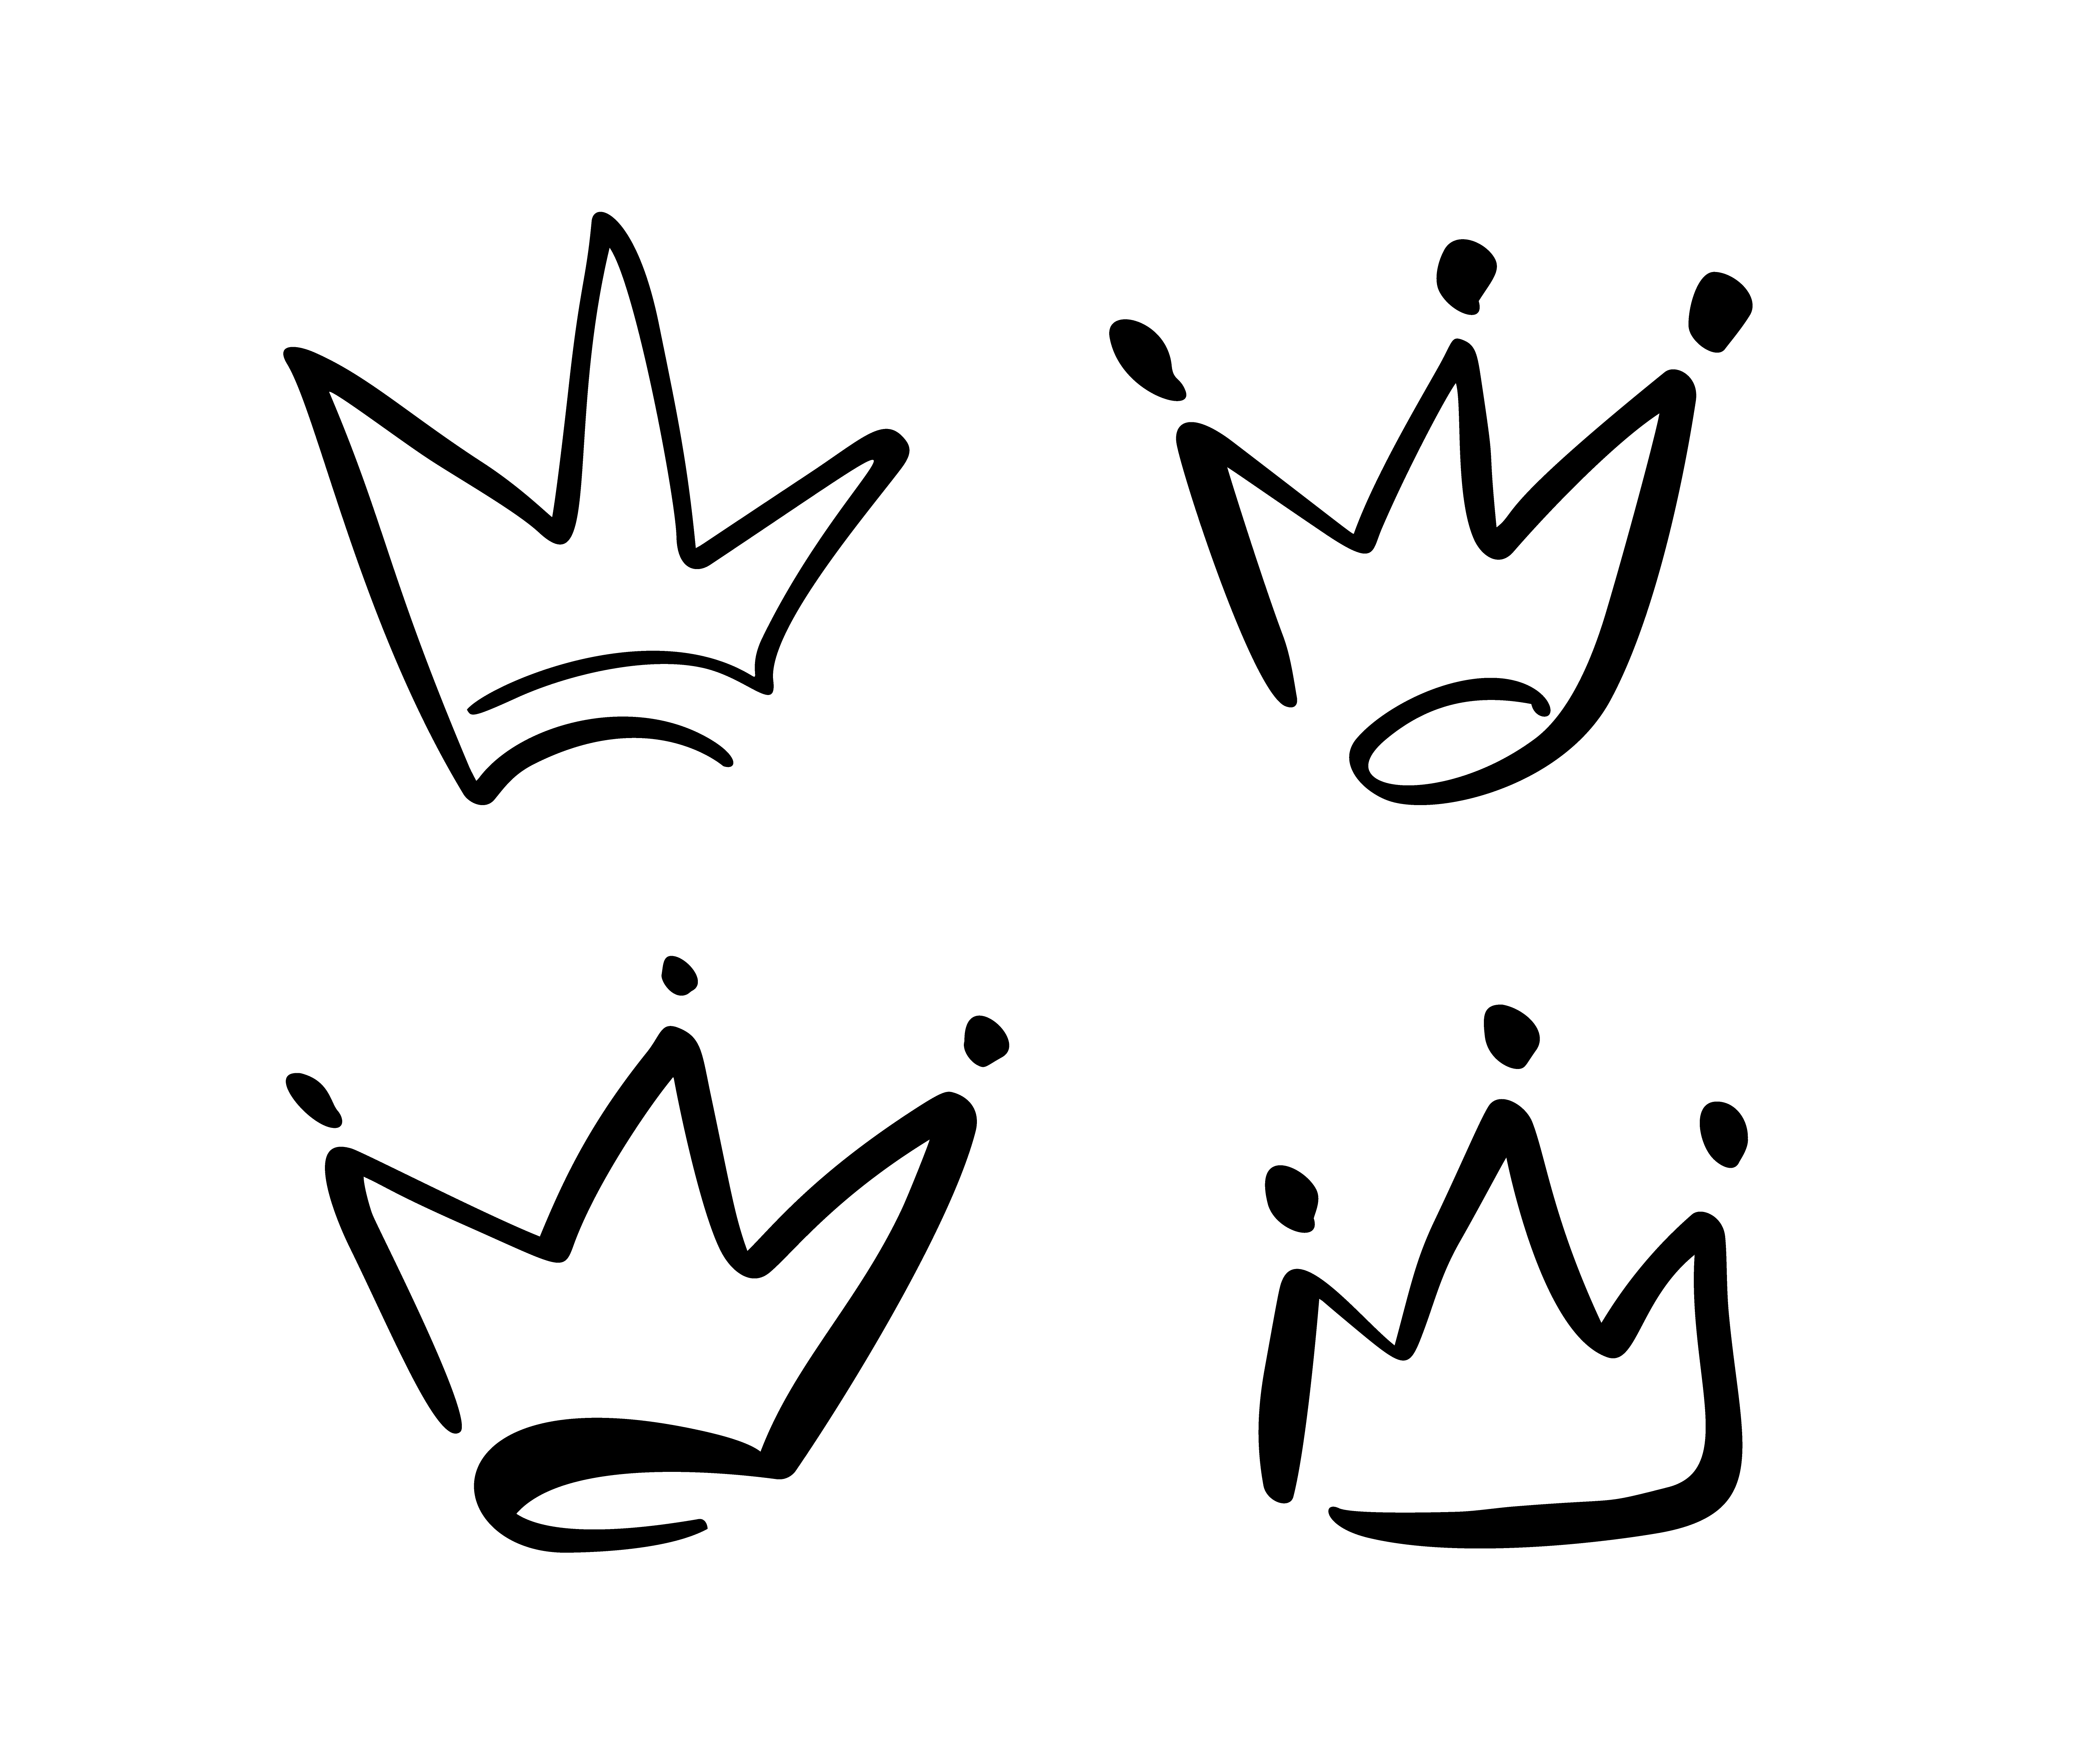 Set of hand drawn symbol of a stylized crown. Drawn with a black ink